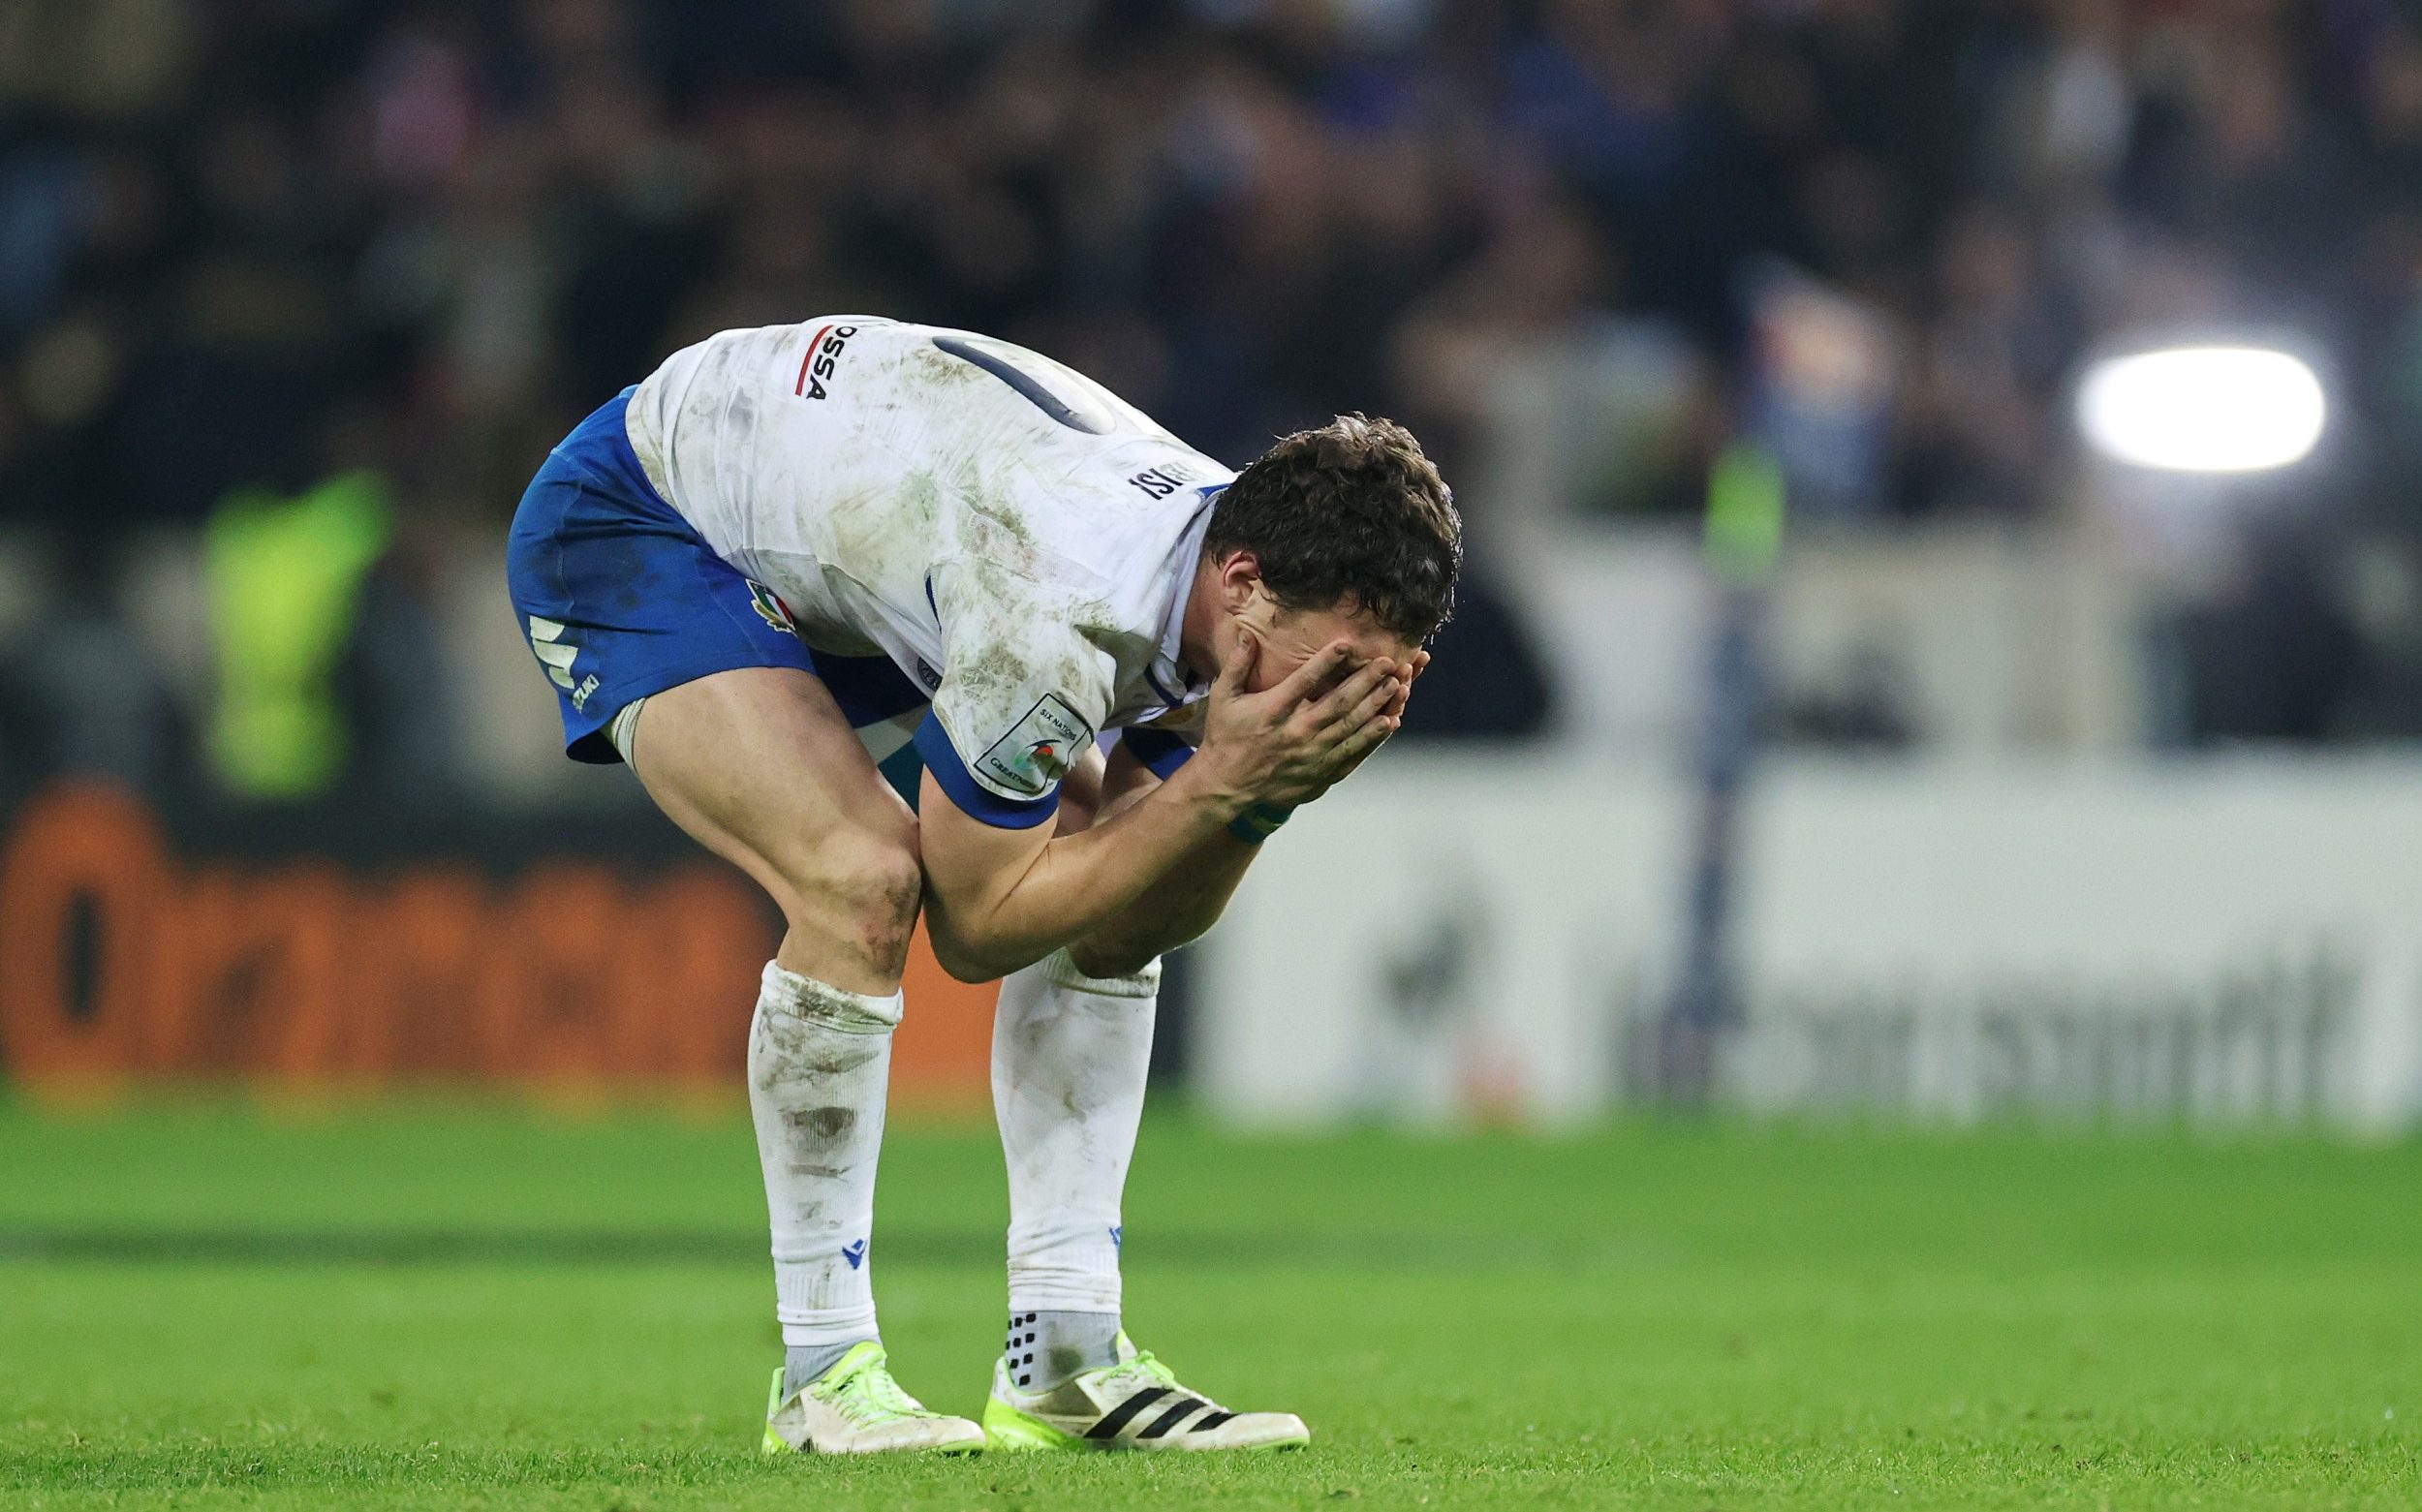 italy say missed conversion to beat france ‘should have been taken again’ after last-gasp heartbreak